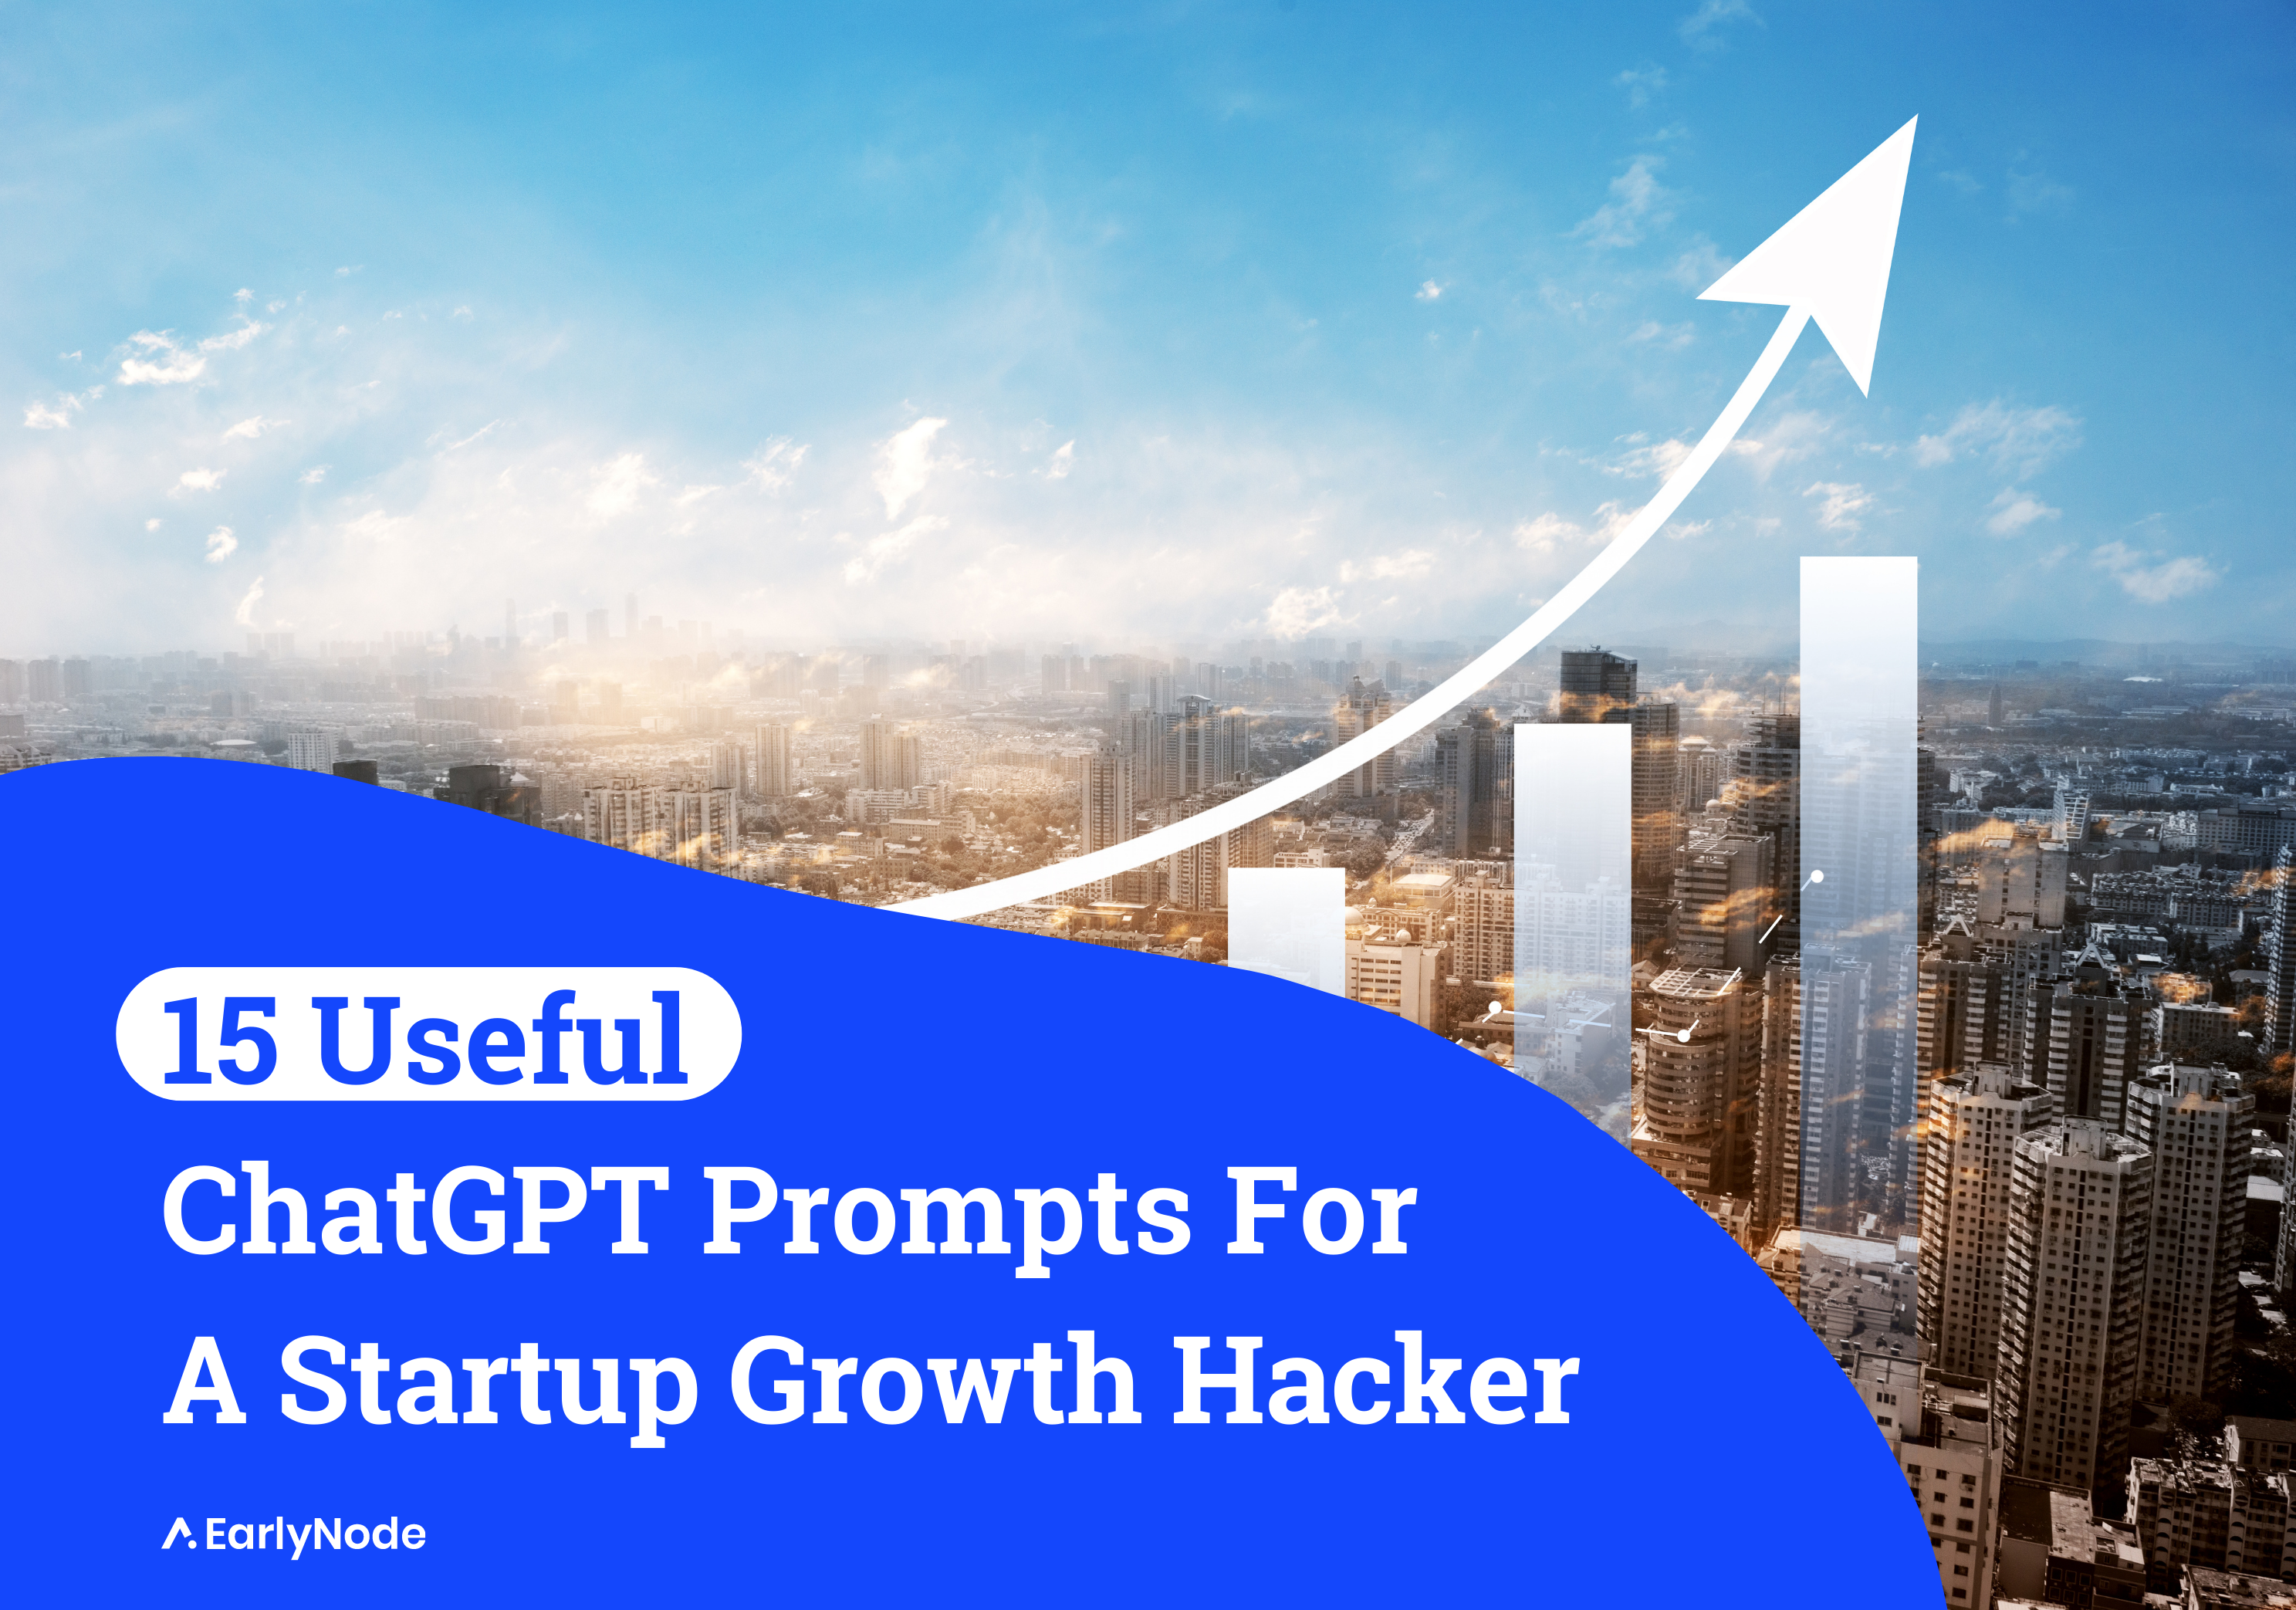 15 ChatGPT Prompts For Growth Hackers to Boost Their Startup